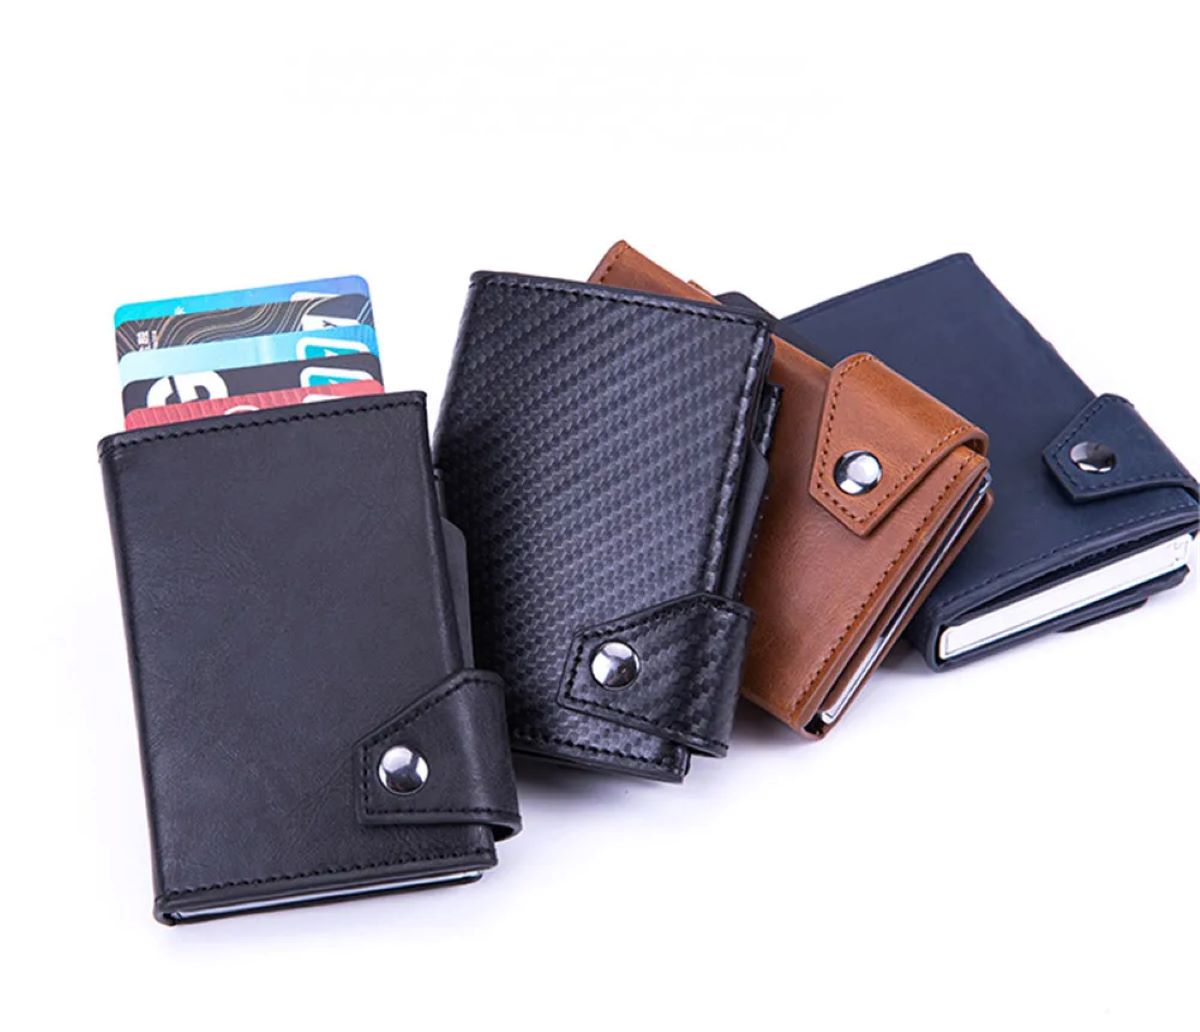 umoven Wallet for Men - with Money Clip Slim Leather Slots Credit Card Holder RFID Blocking Bifold Minimalist Wallet with Gift Box